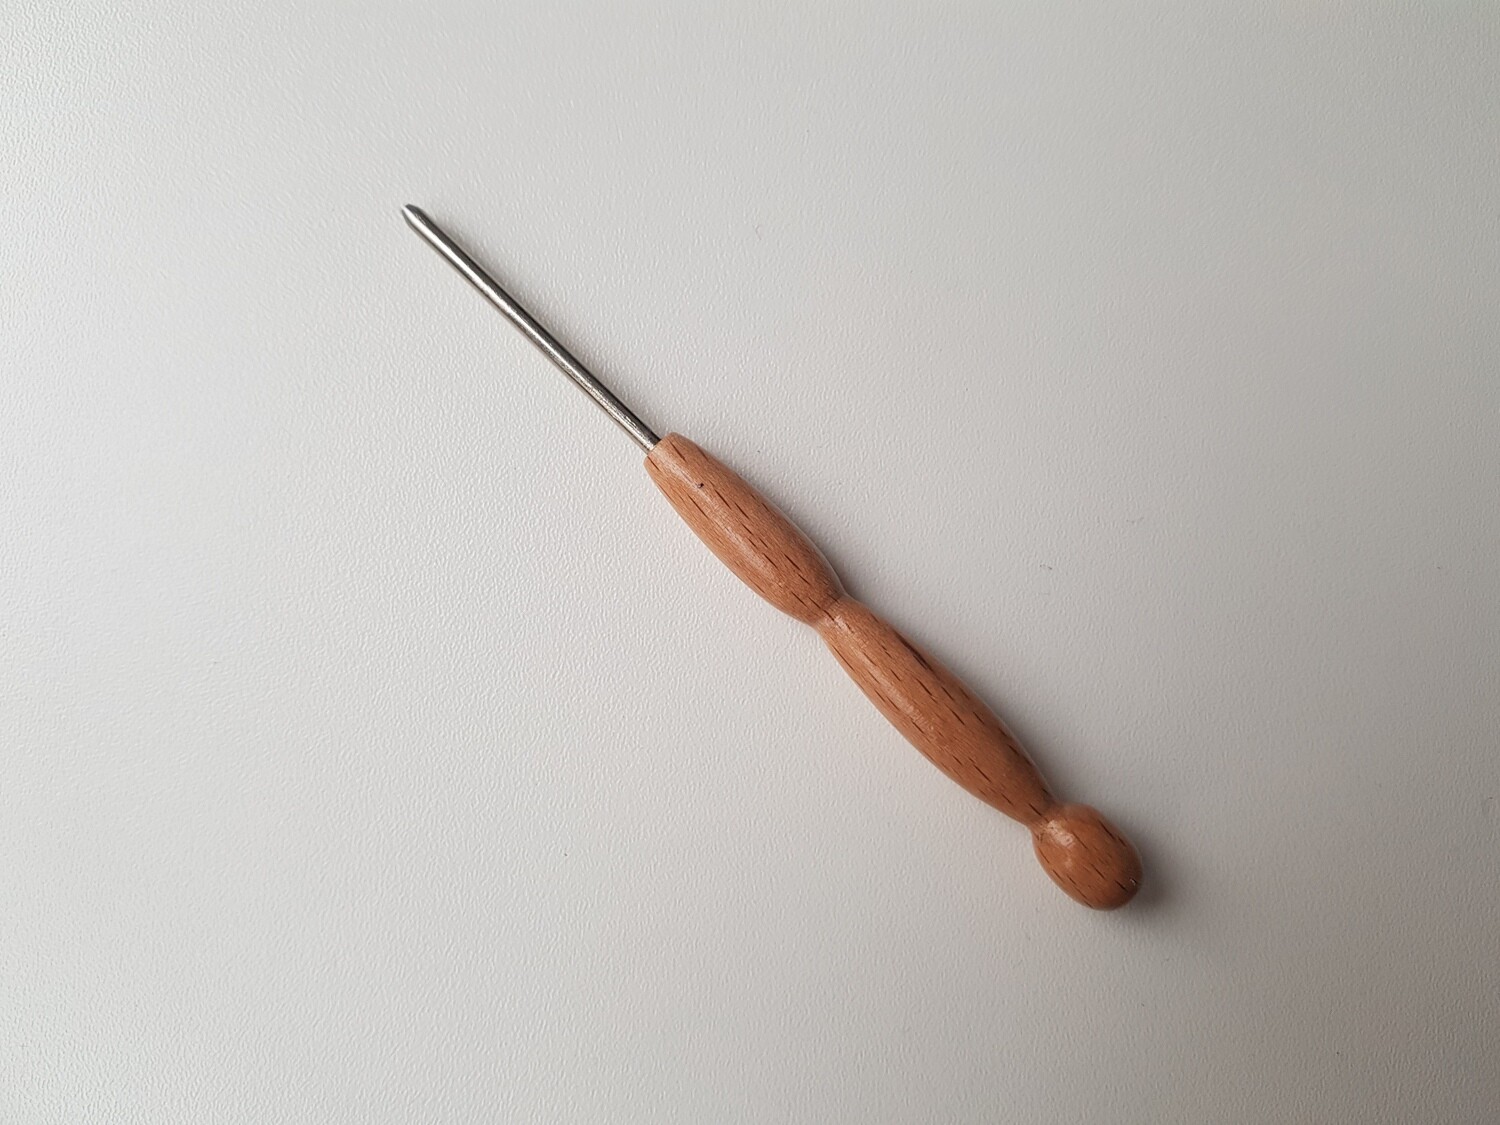 A Tool Used to Make Picots Consistent / Picot Gauge 2.6 mm